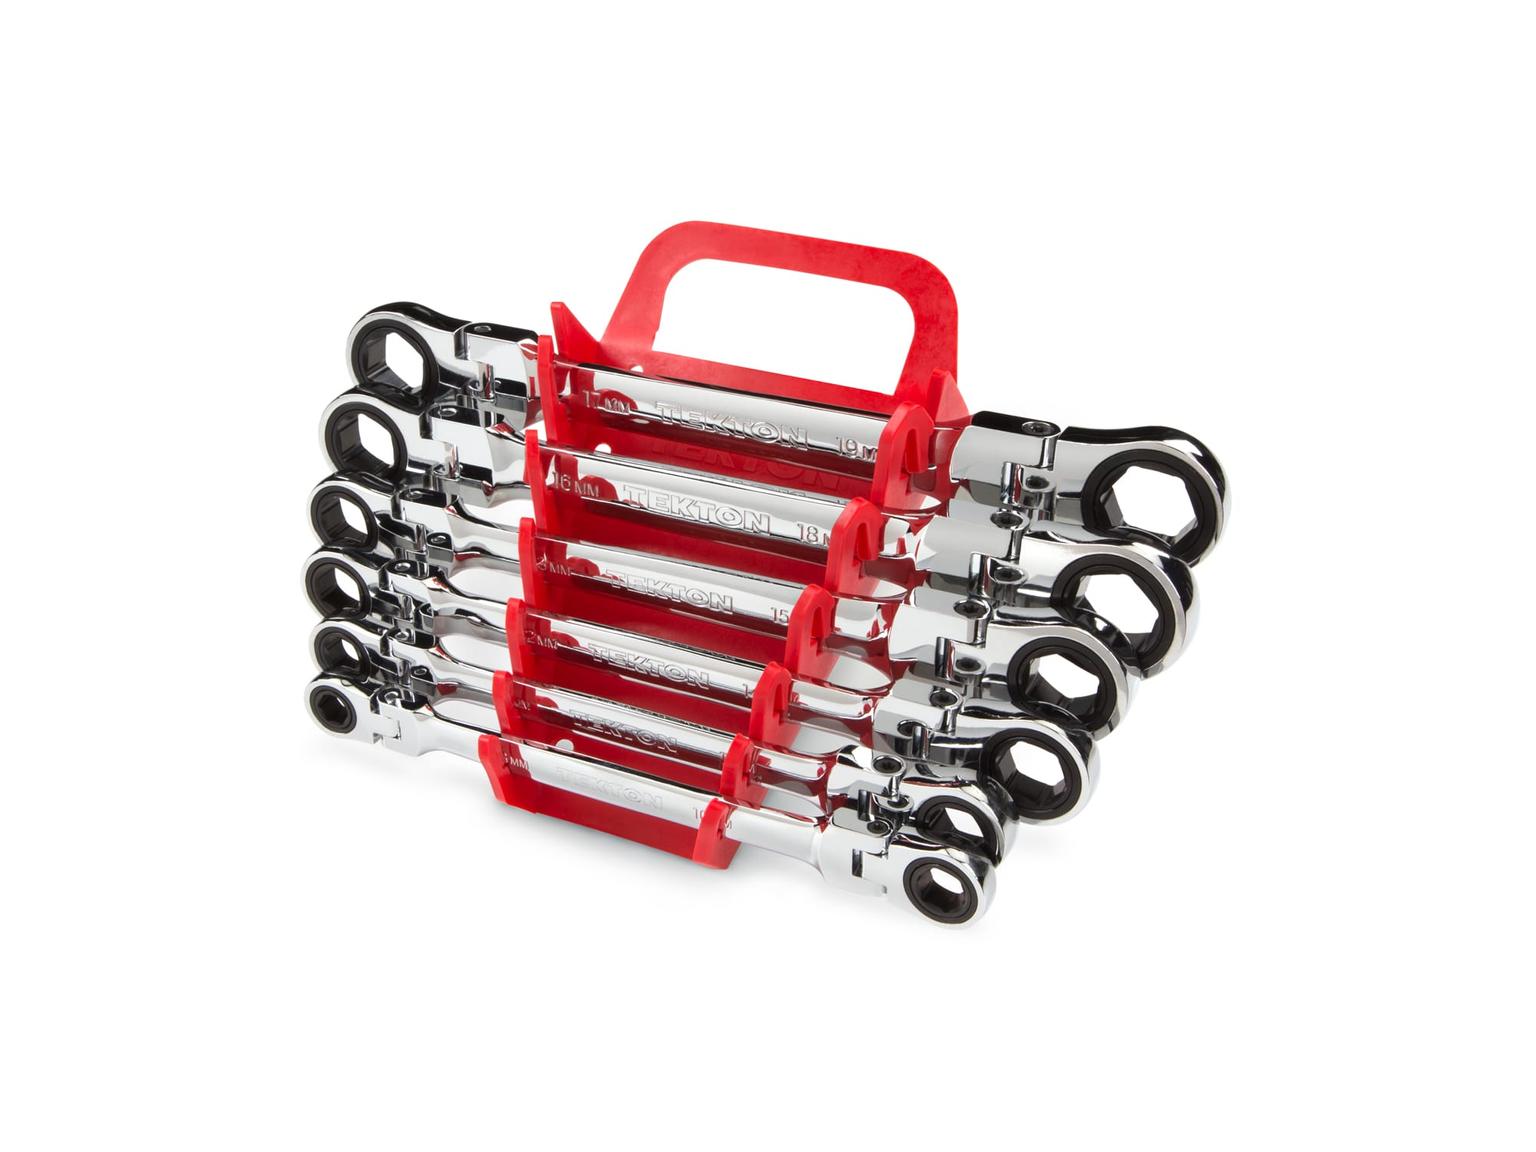 TEKTON WRN76164-T Flex Ratcheting Box End Wrench Set with Holder, 6-Piece (8-19 mm)